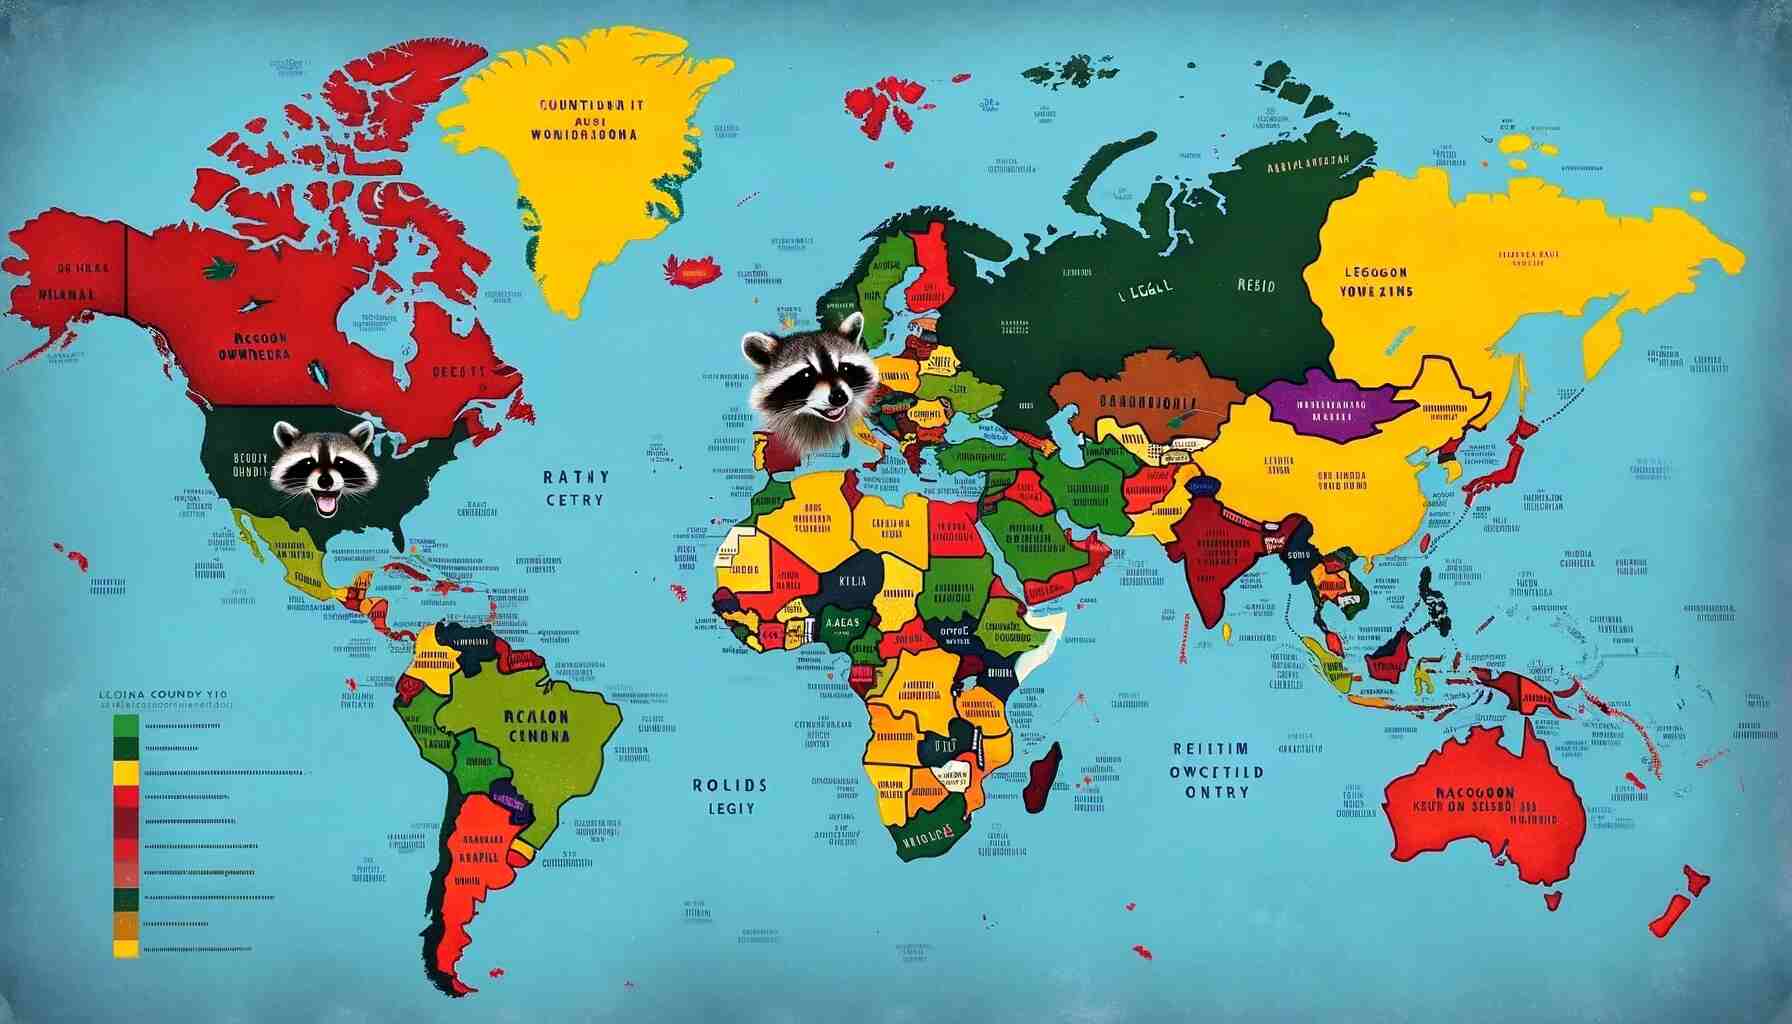 Here is the map representing the legality of raccoon ownership around the world. The map uses color coding to indicate the legal status in various countries, making it easier to understand the global perspective on raccoon ownership legality.